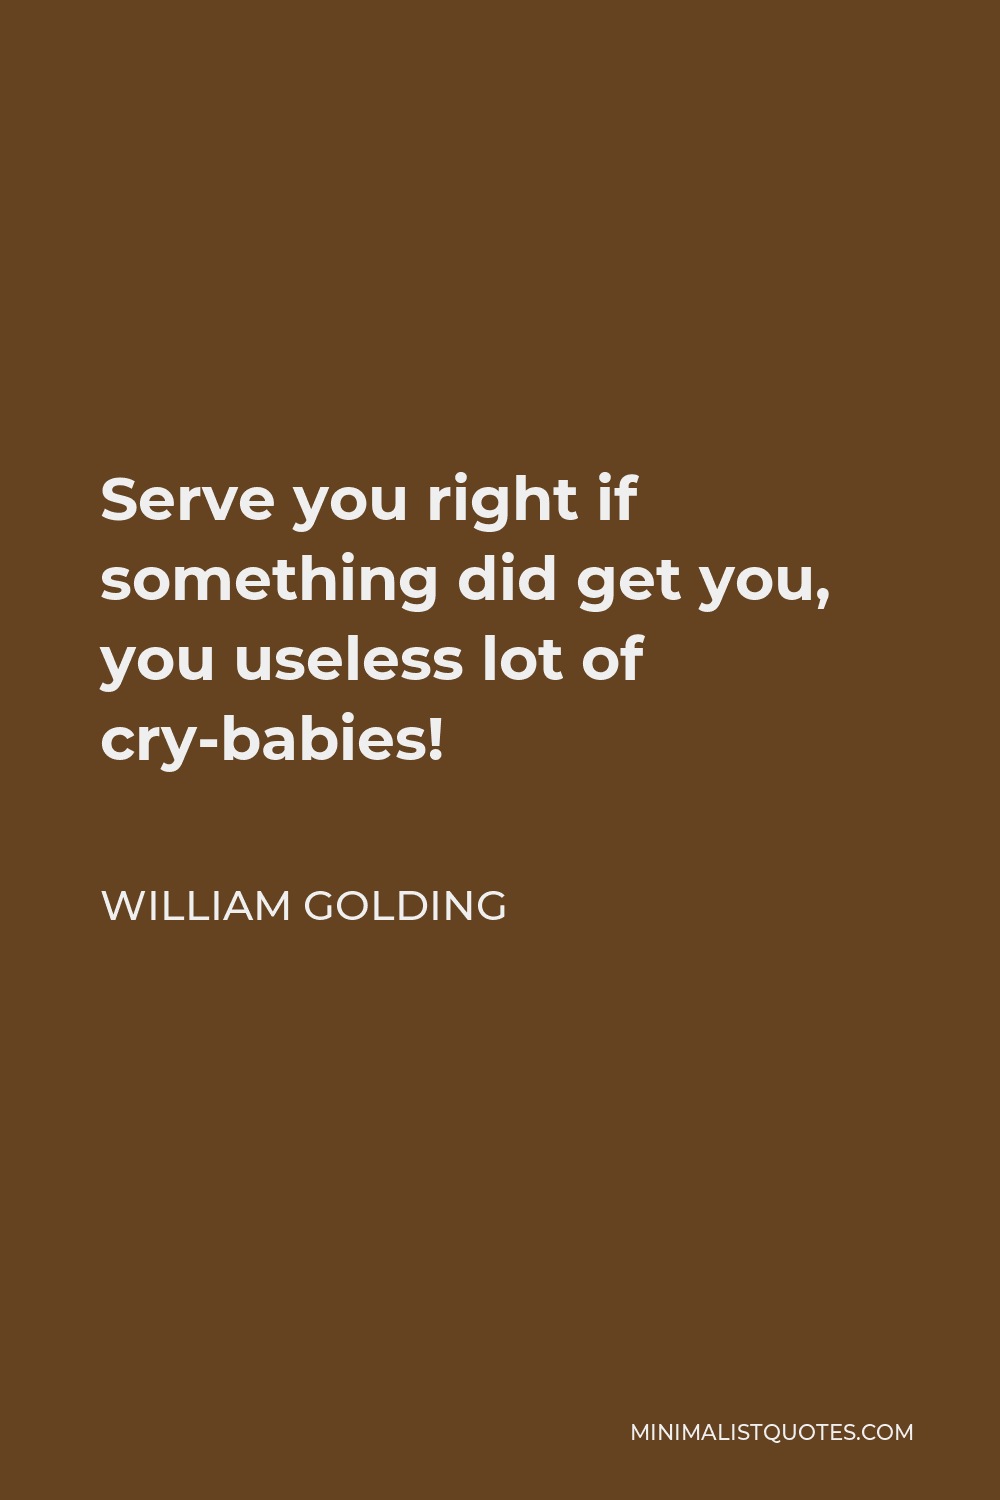 William Golding Quote - Serve you right if something did get you, you useless lot of cry-babies!